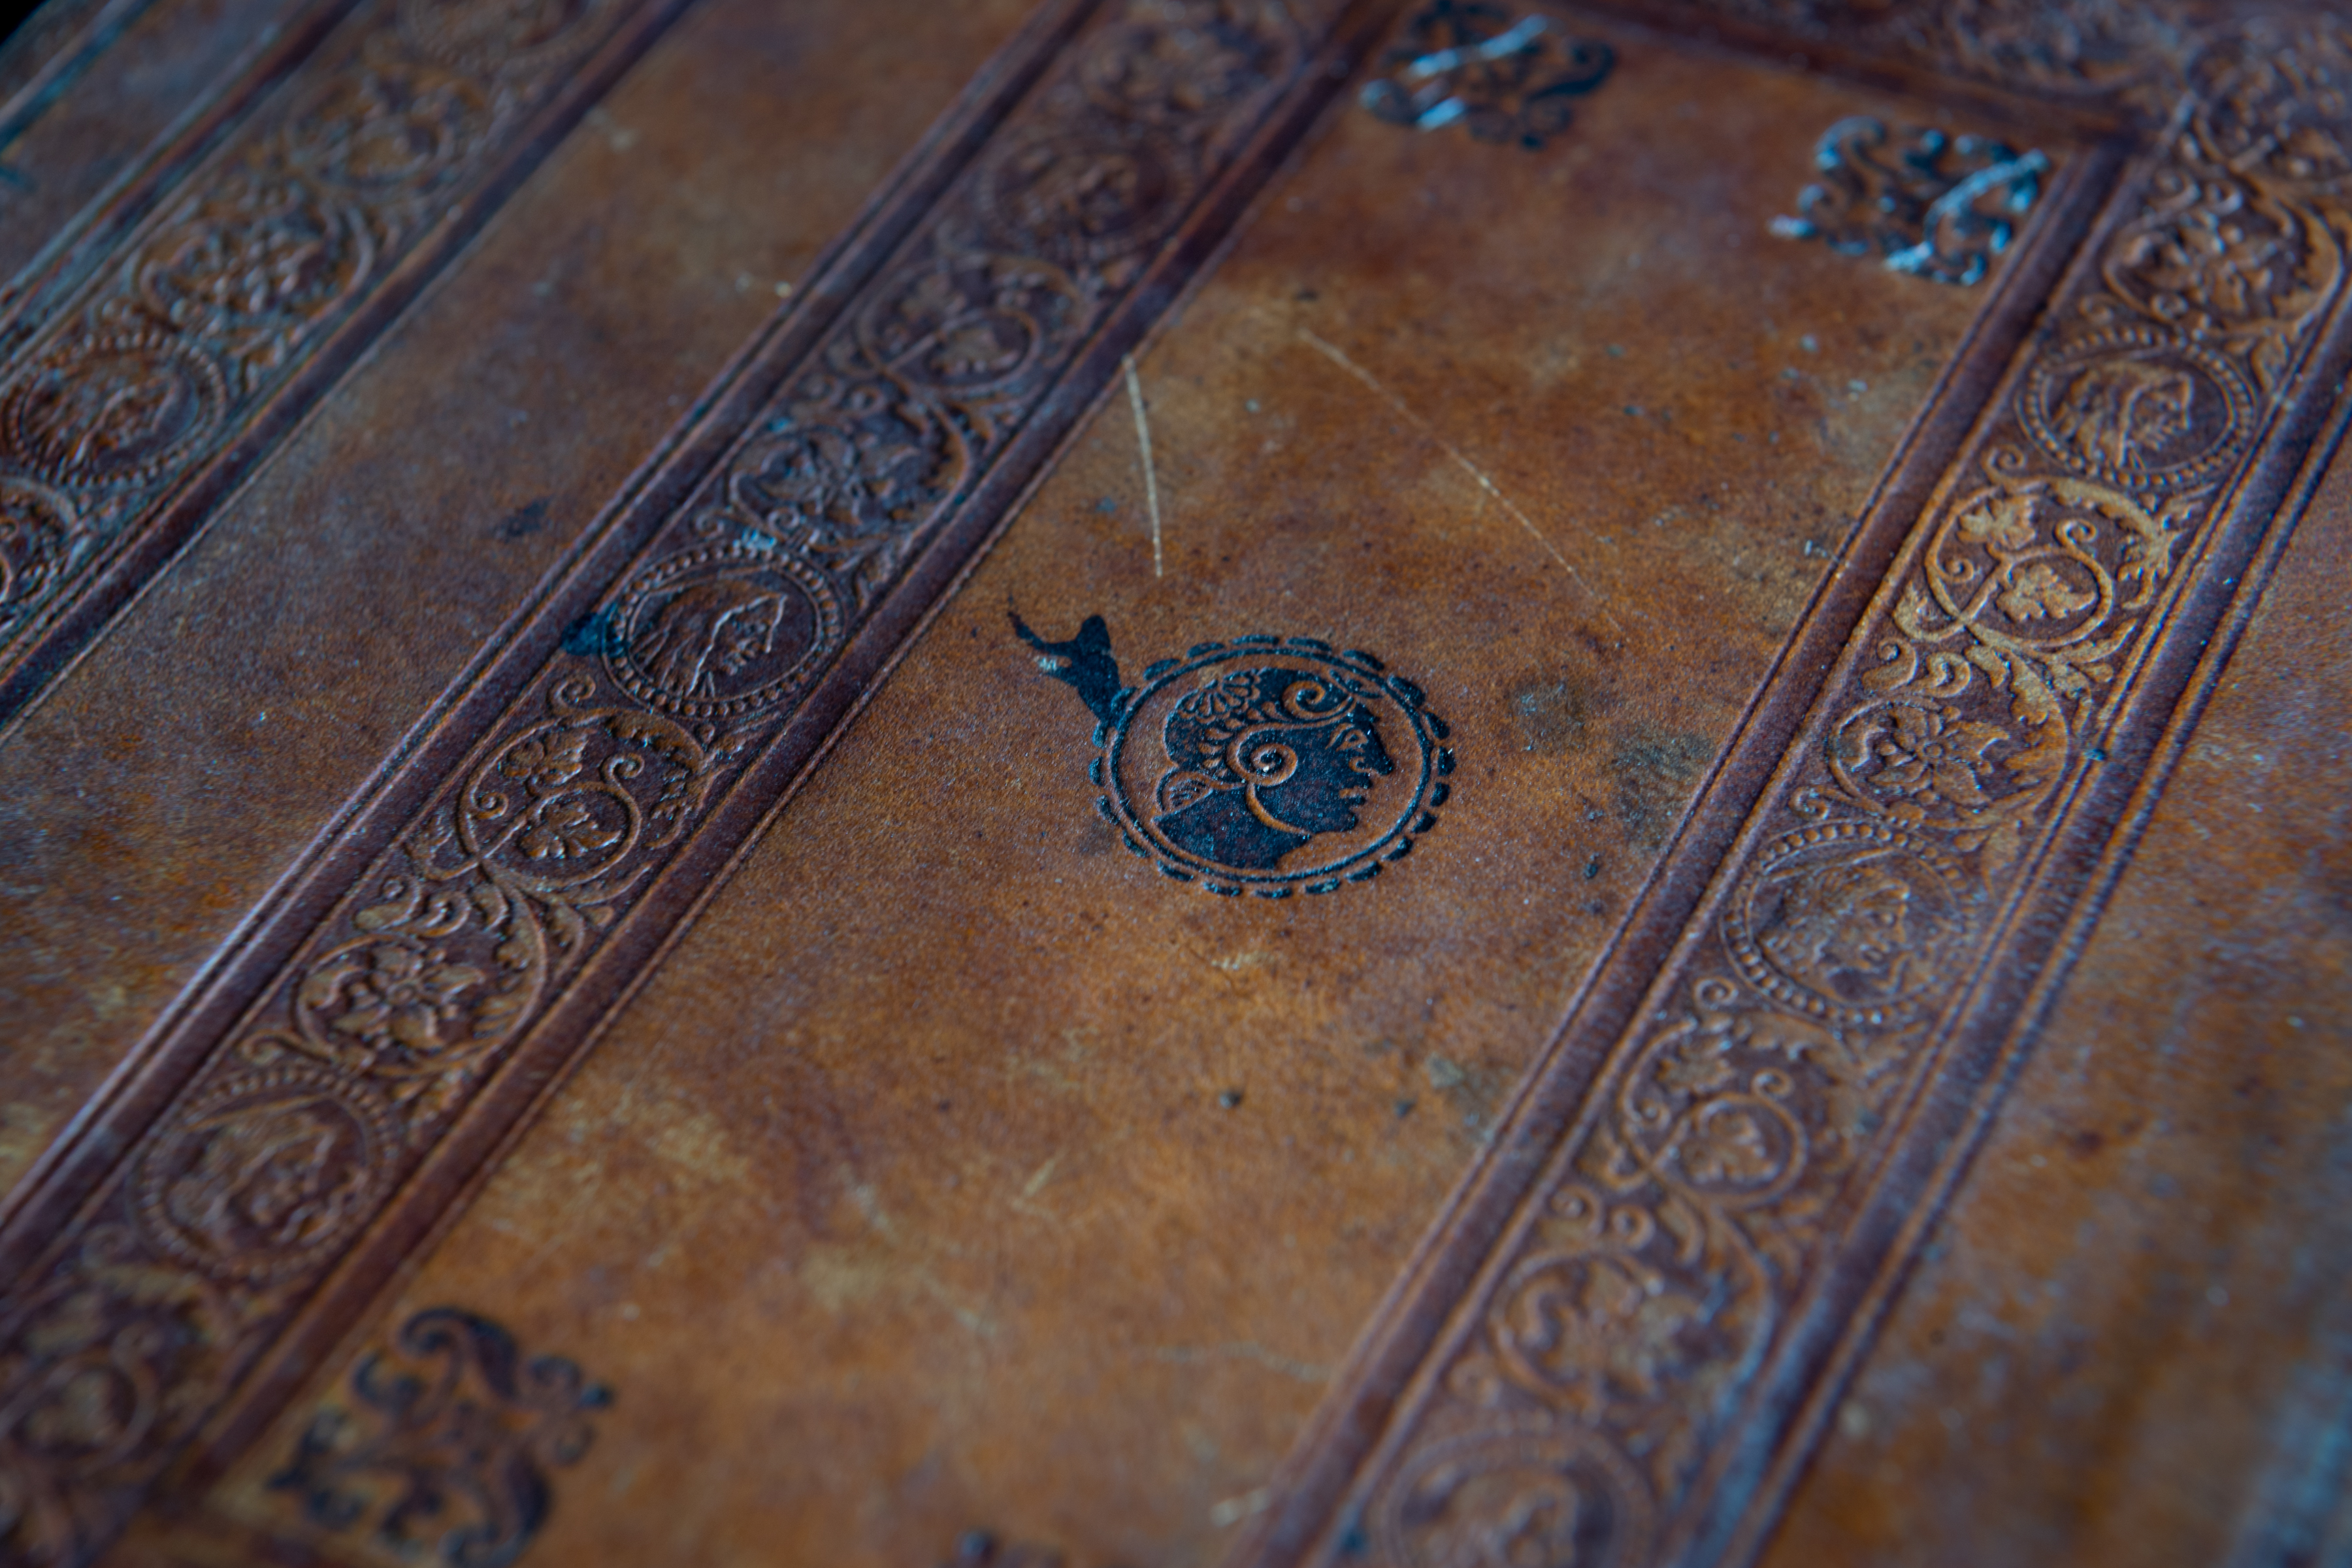 Detail of brown book binding shows the embossed details.